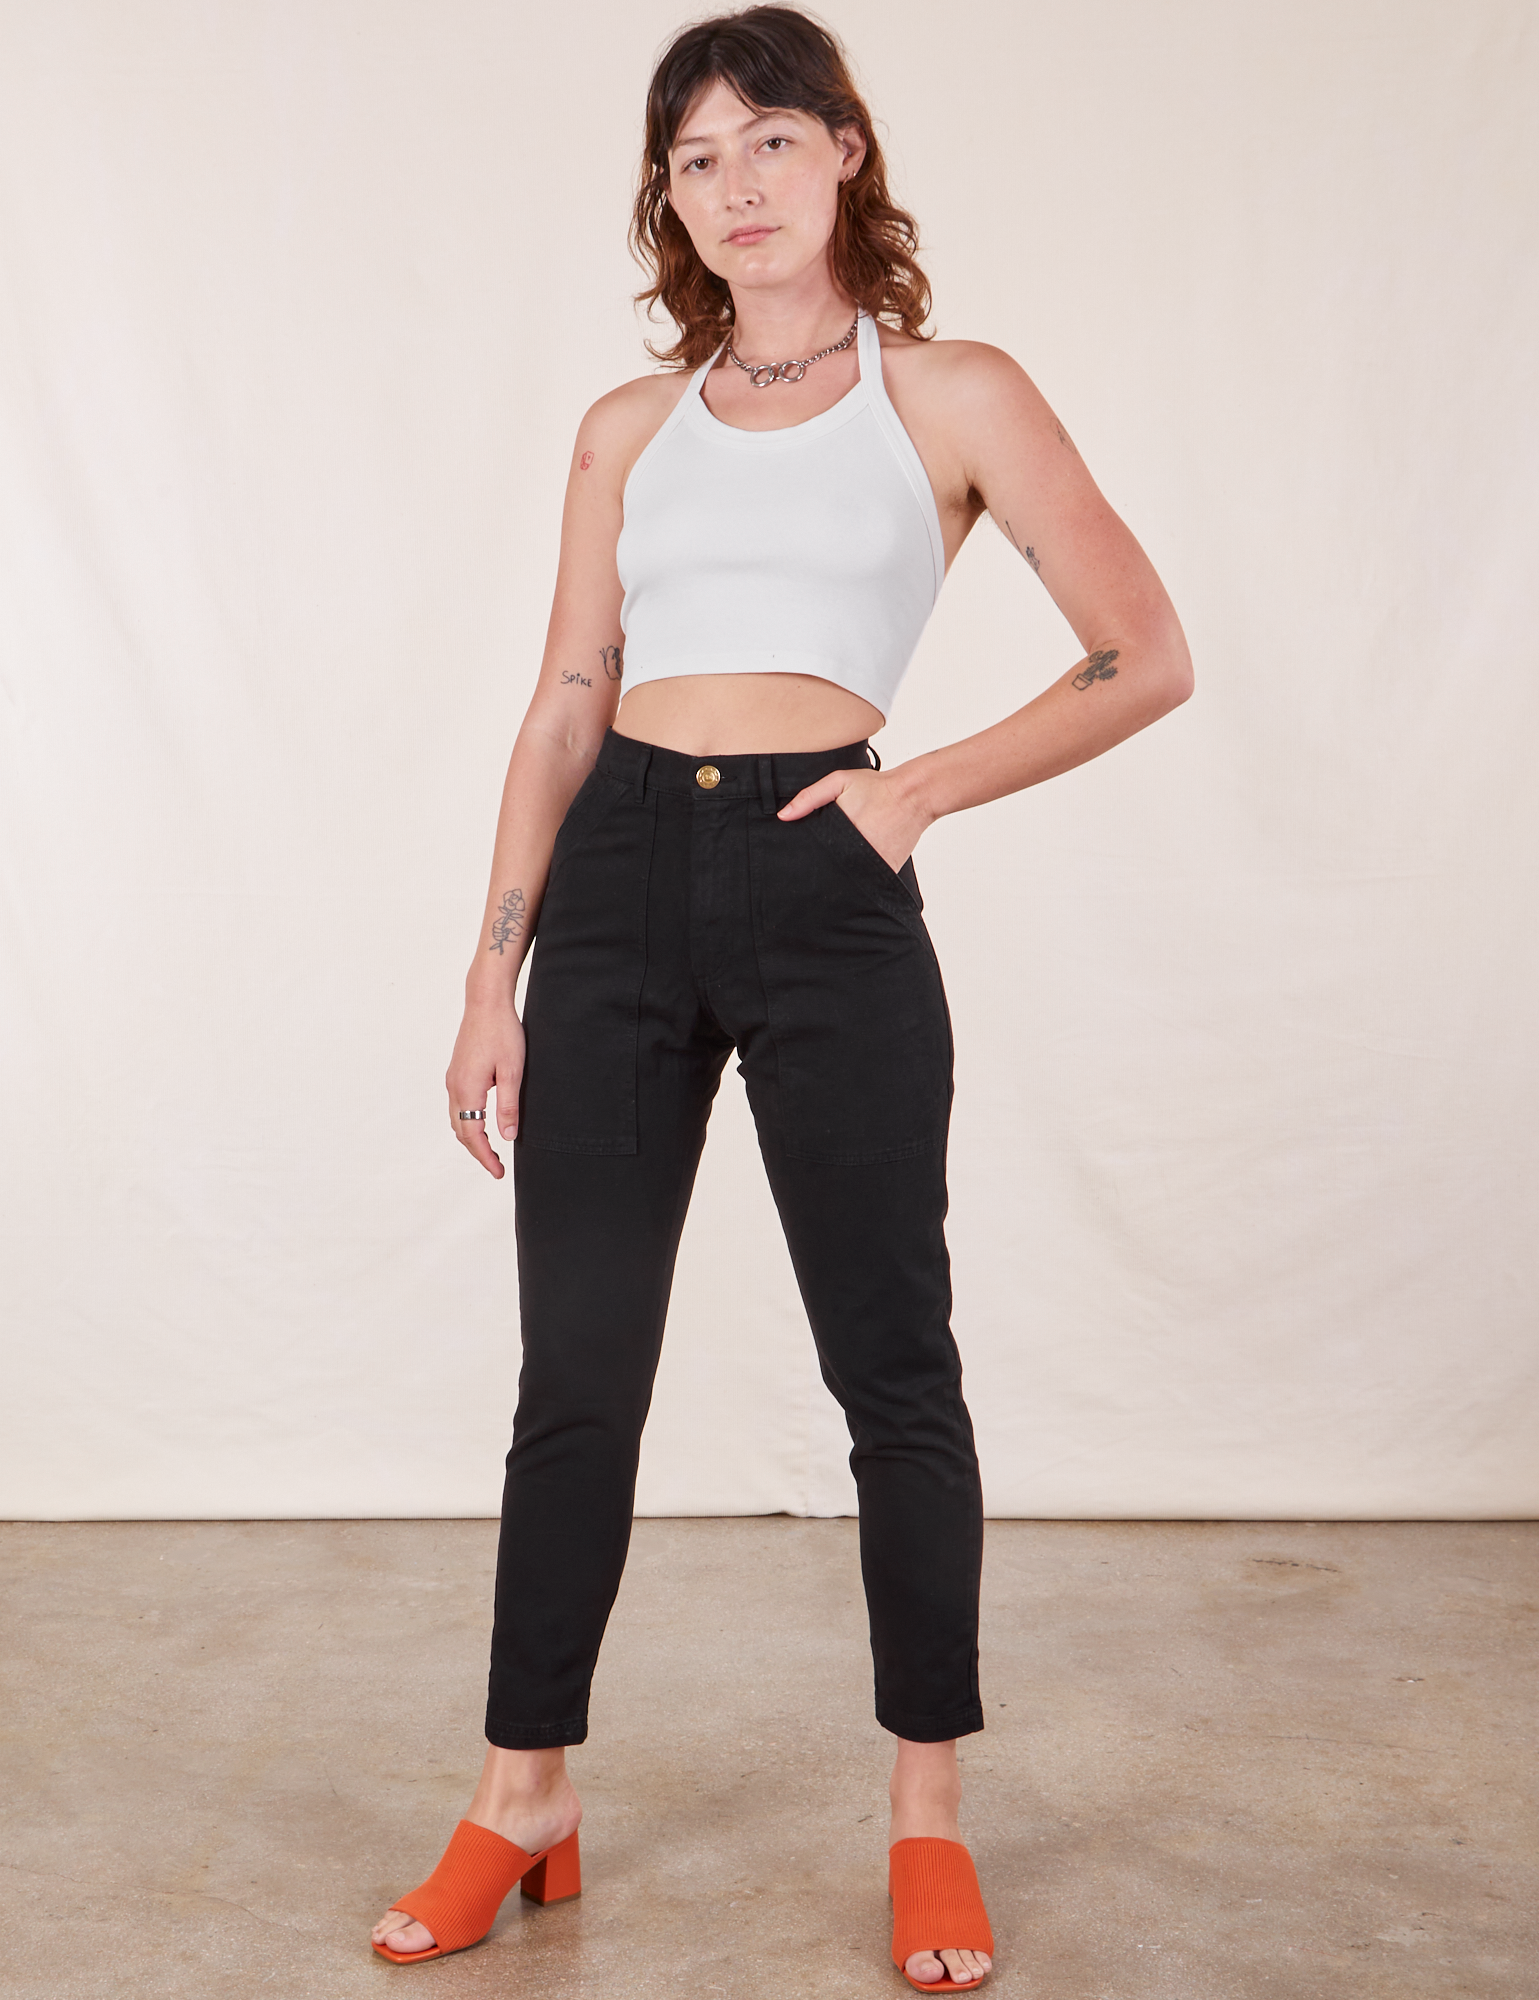 Alex is 5&#39;8&quot; and wearing XXS Pencil Pants in Basic Black paired with Halter Top in vintage tee off-white